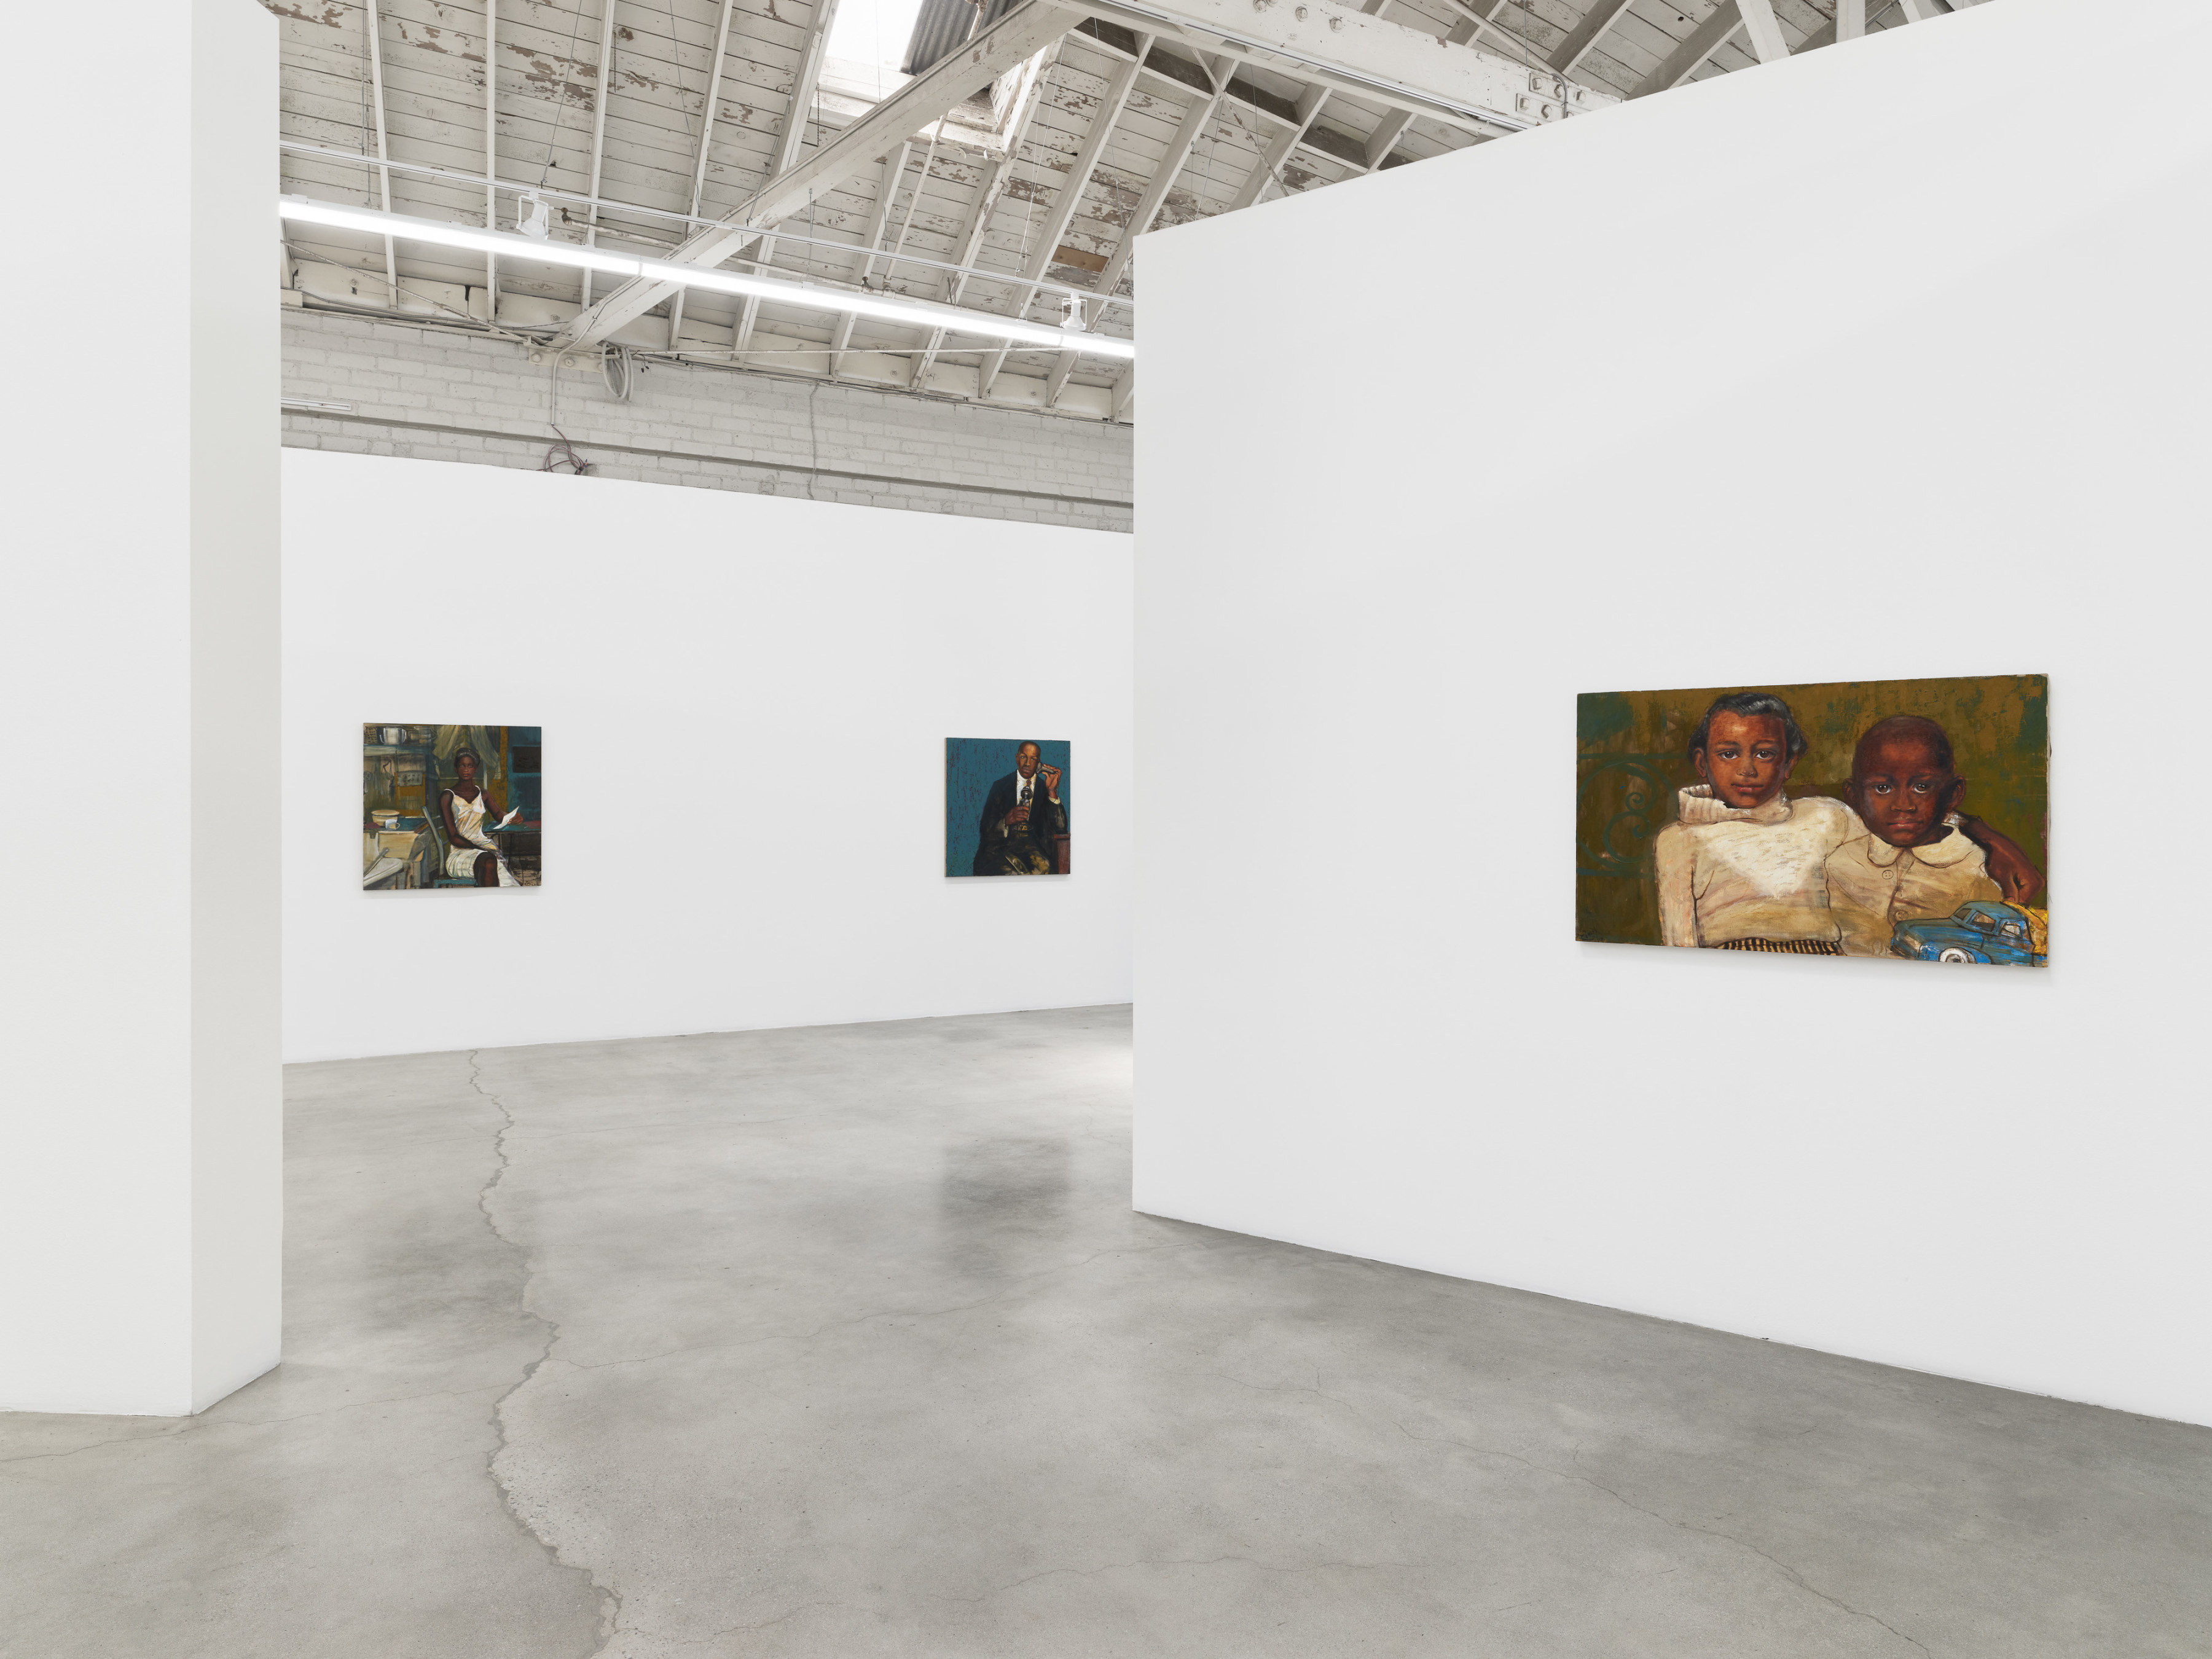 Chaz Guest, Gaining Pride with Promises Broken, installation view, 2022